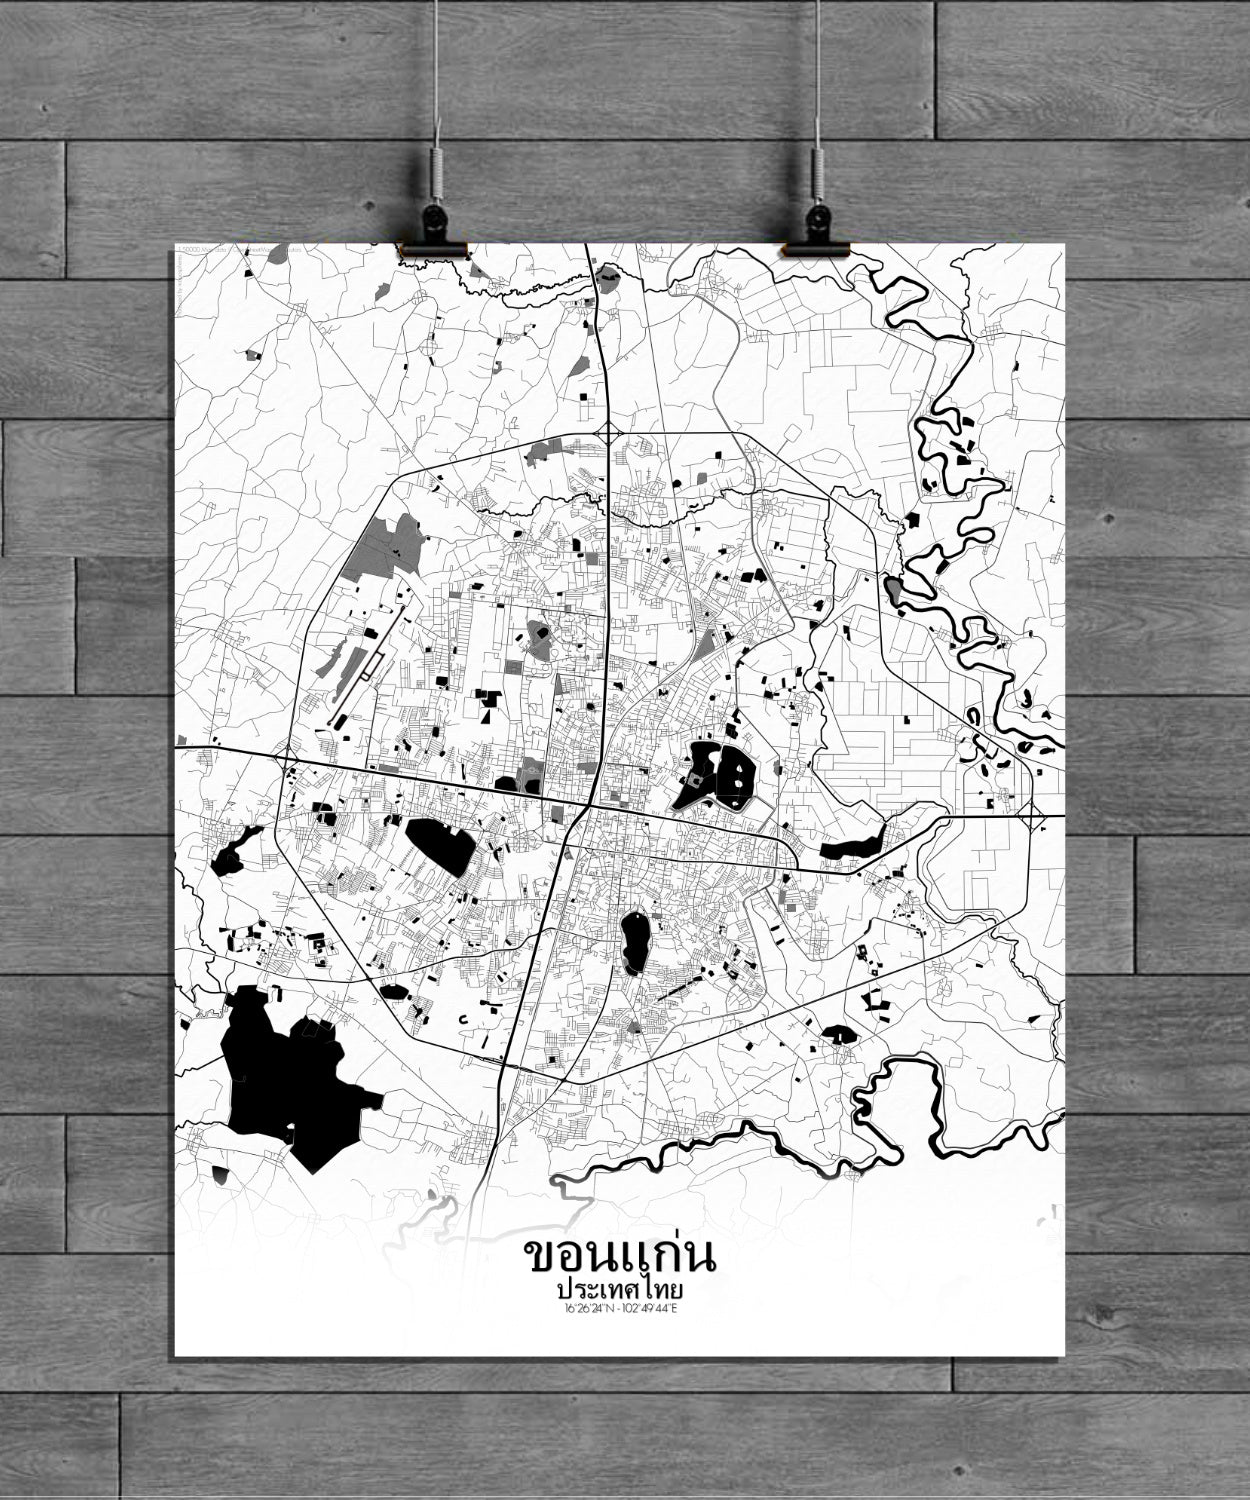 Khonkaen Black and White full page design poster city map